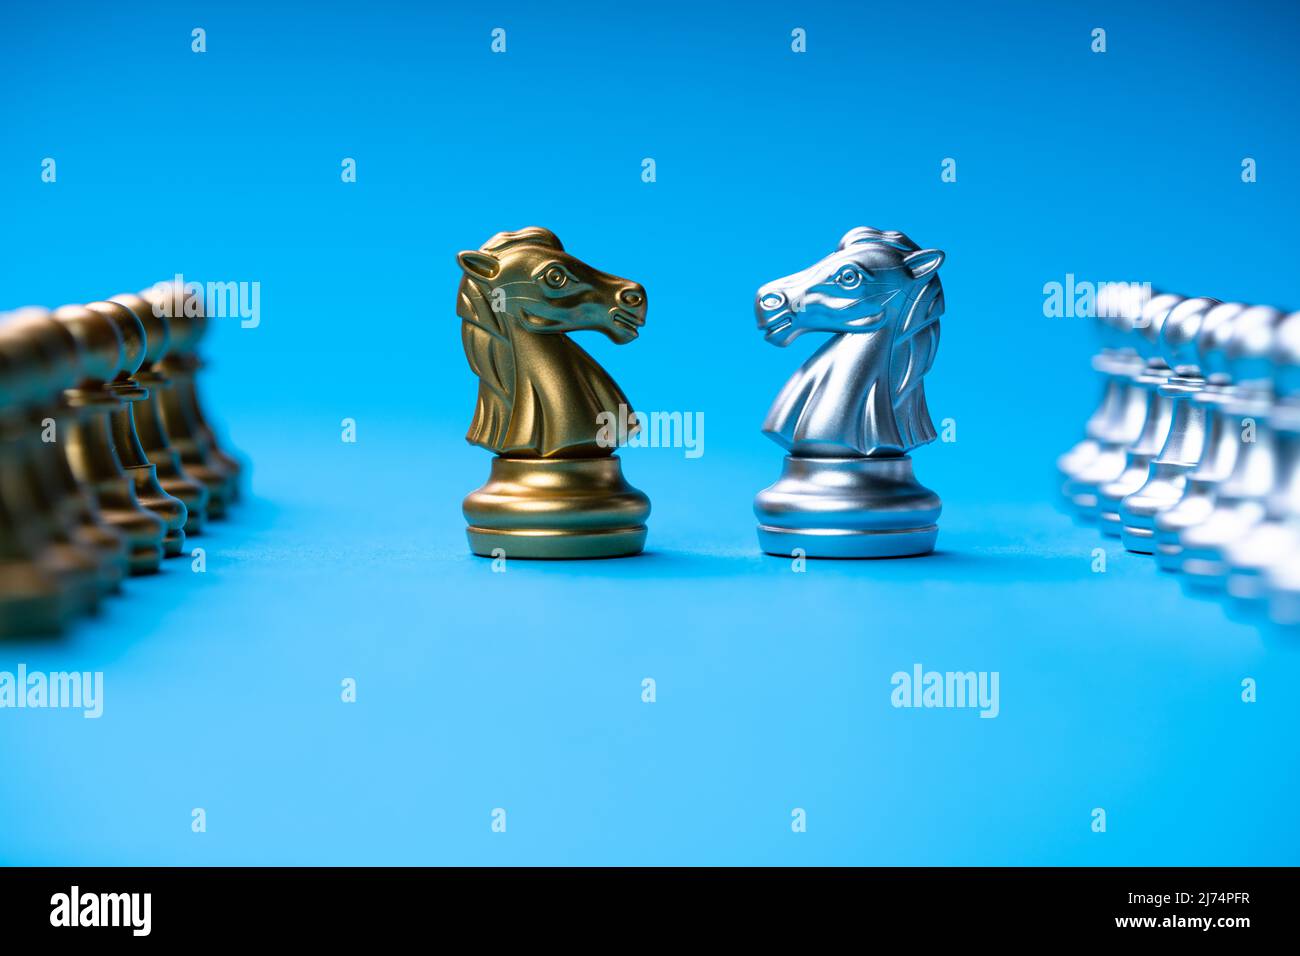 Chess Team Merger And Acquisition. Chessboard Group Acquisitions Repetition Stock Photo